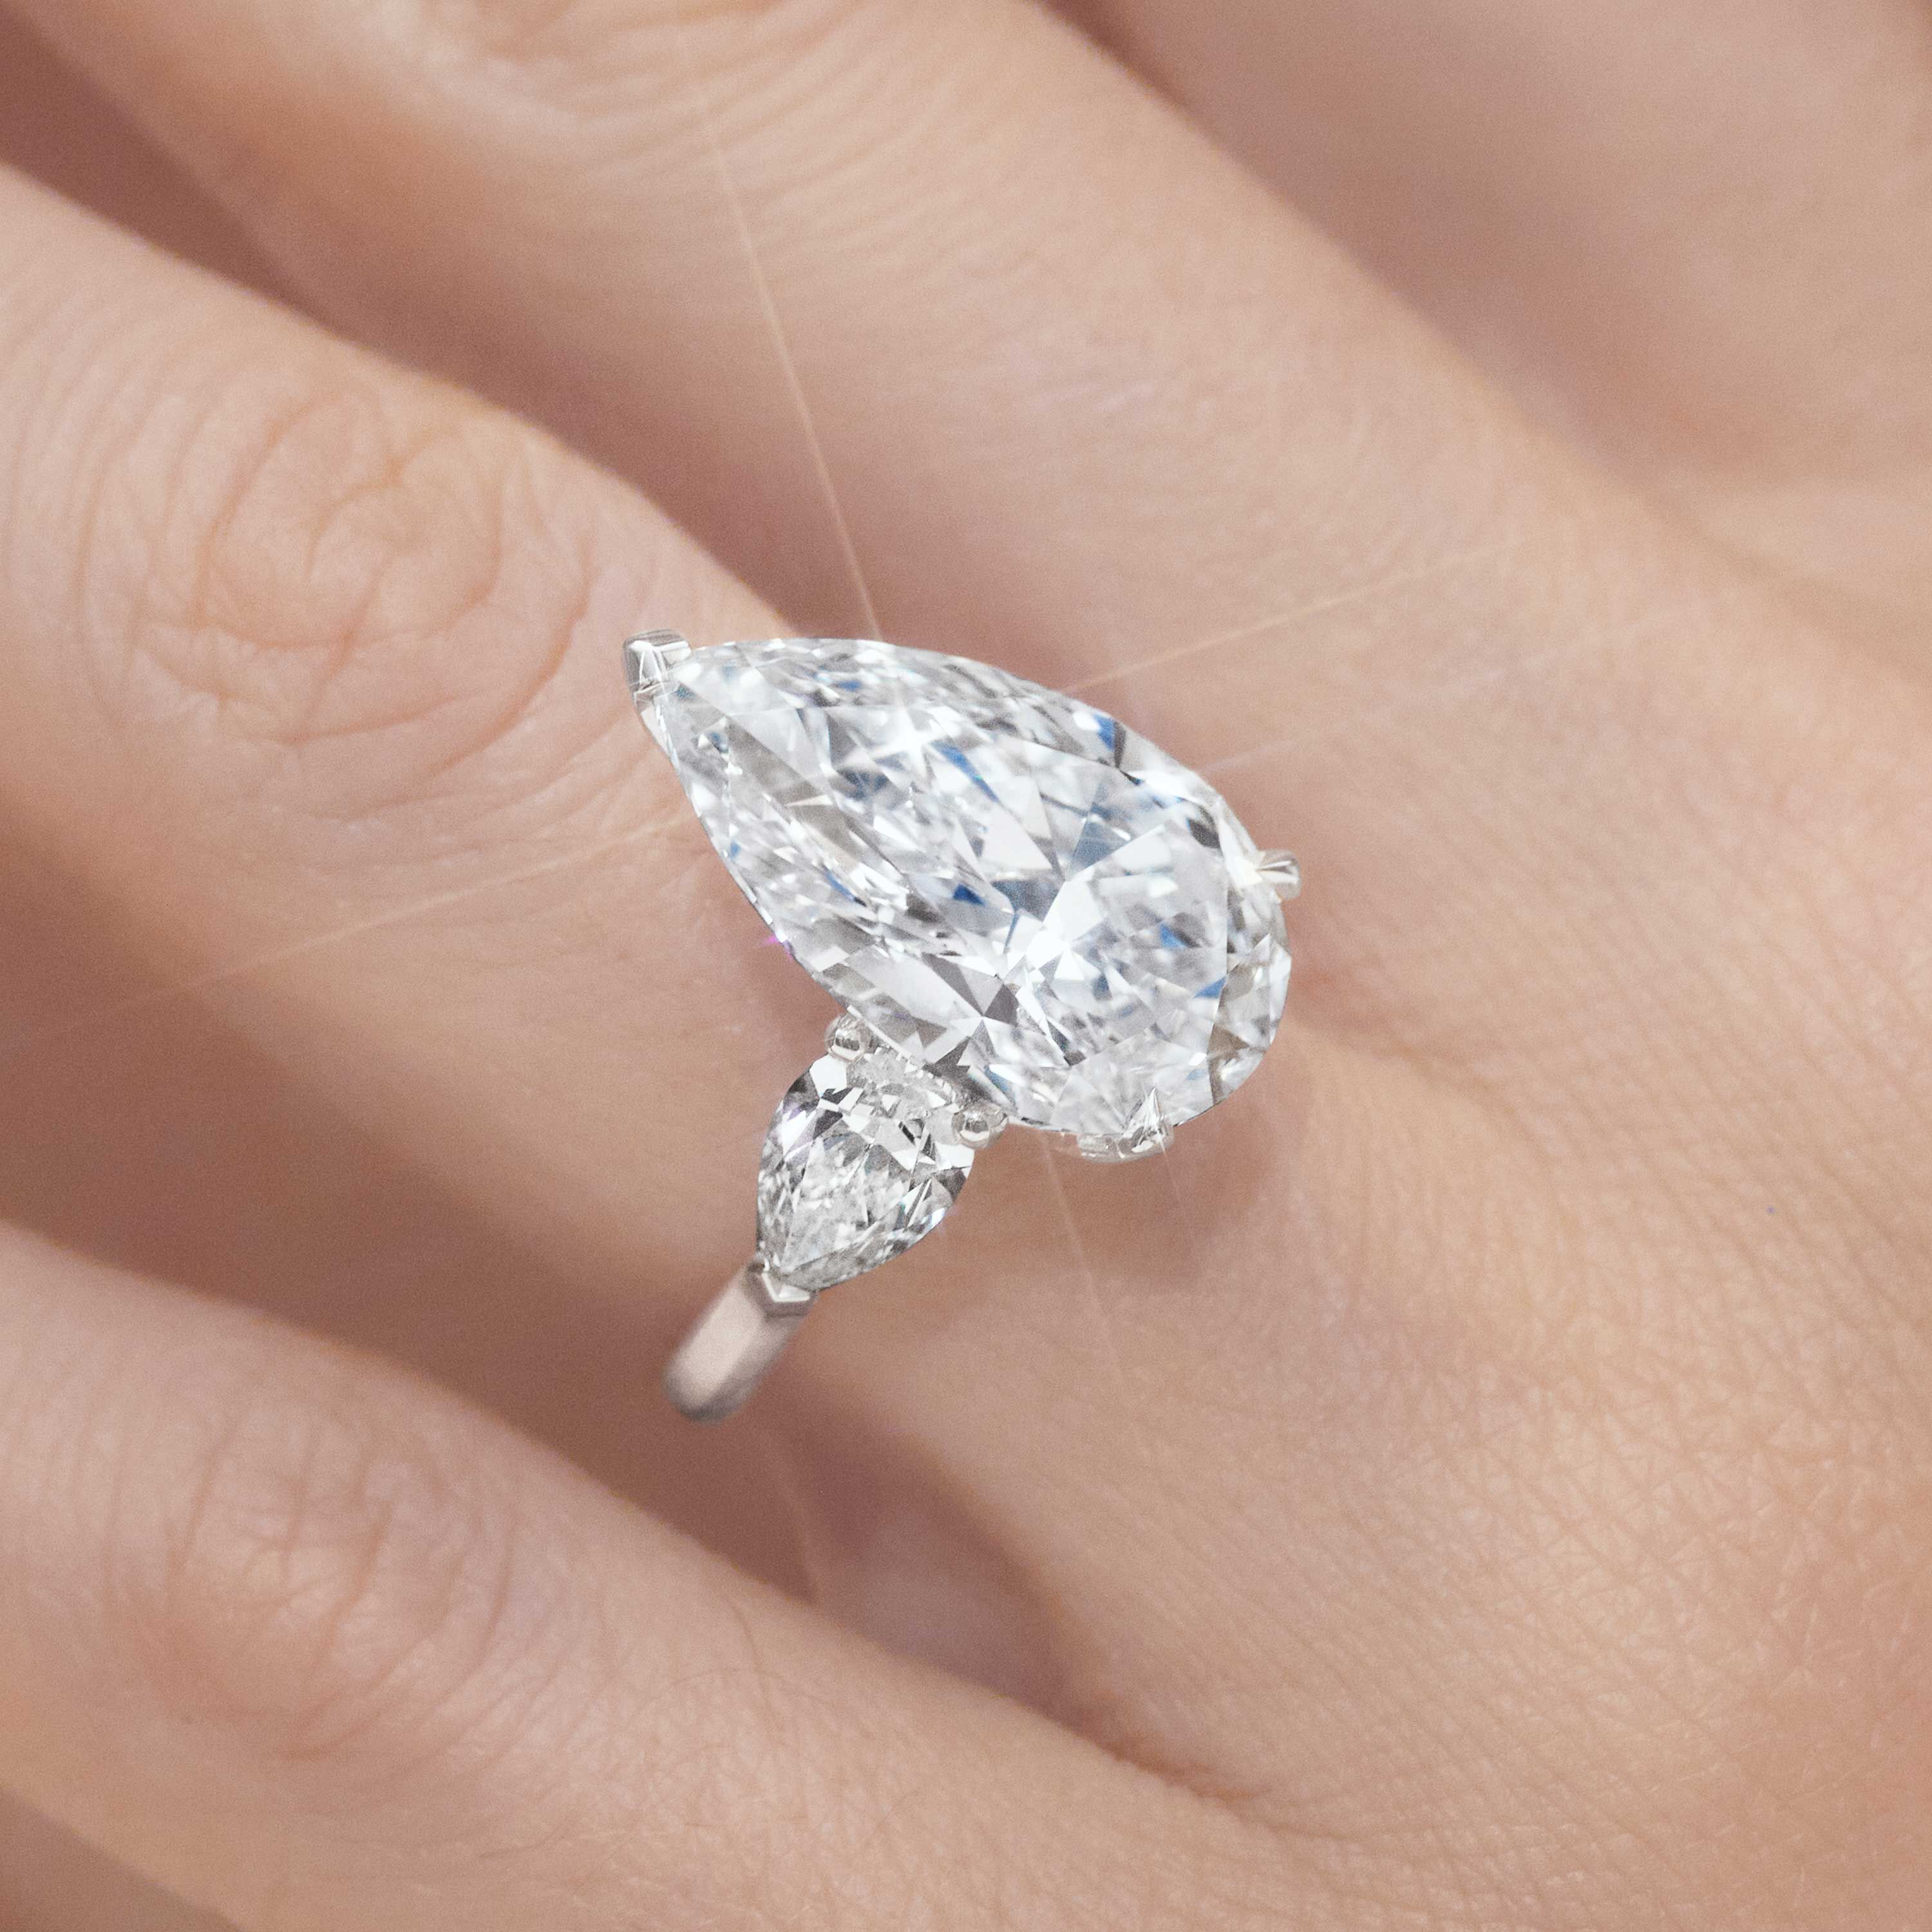 Close up of a Graff pear shape diamond engagement ring wore by a model